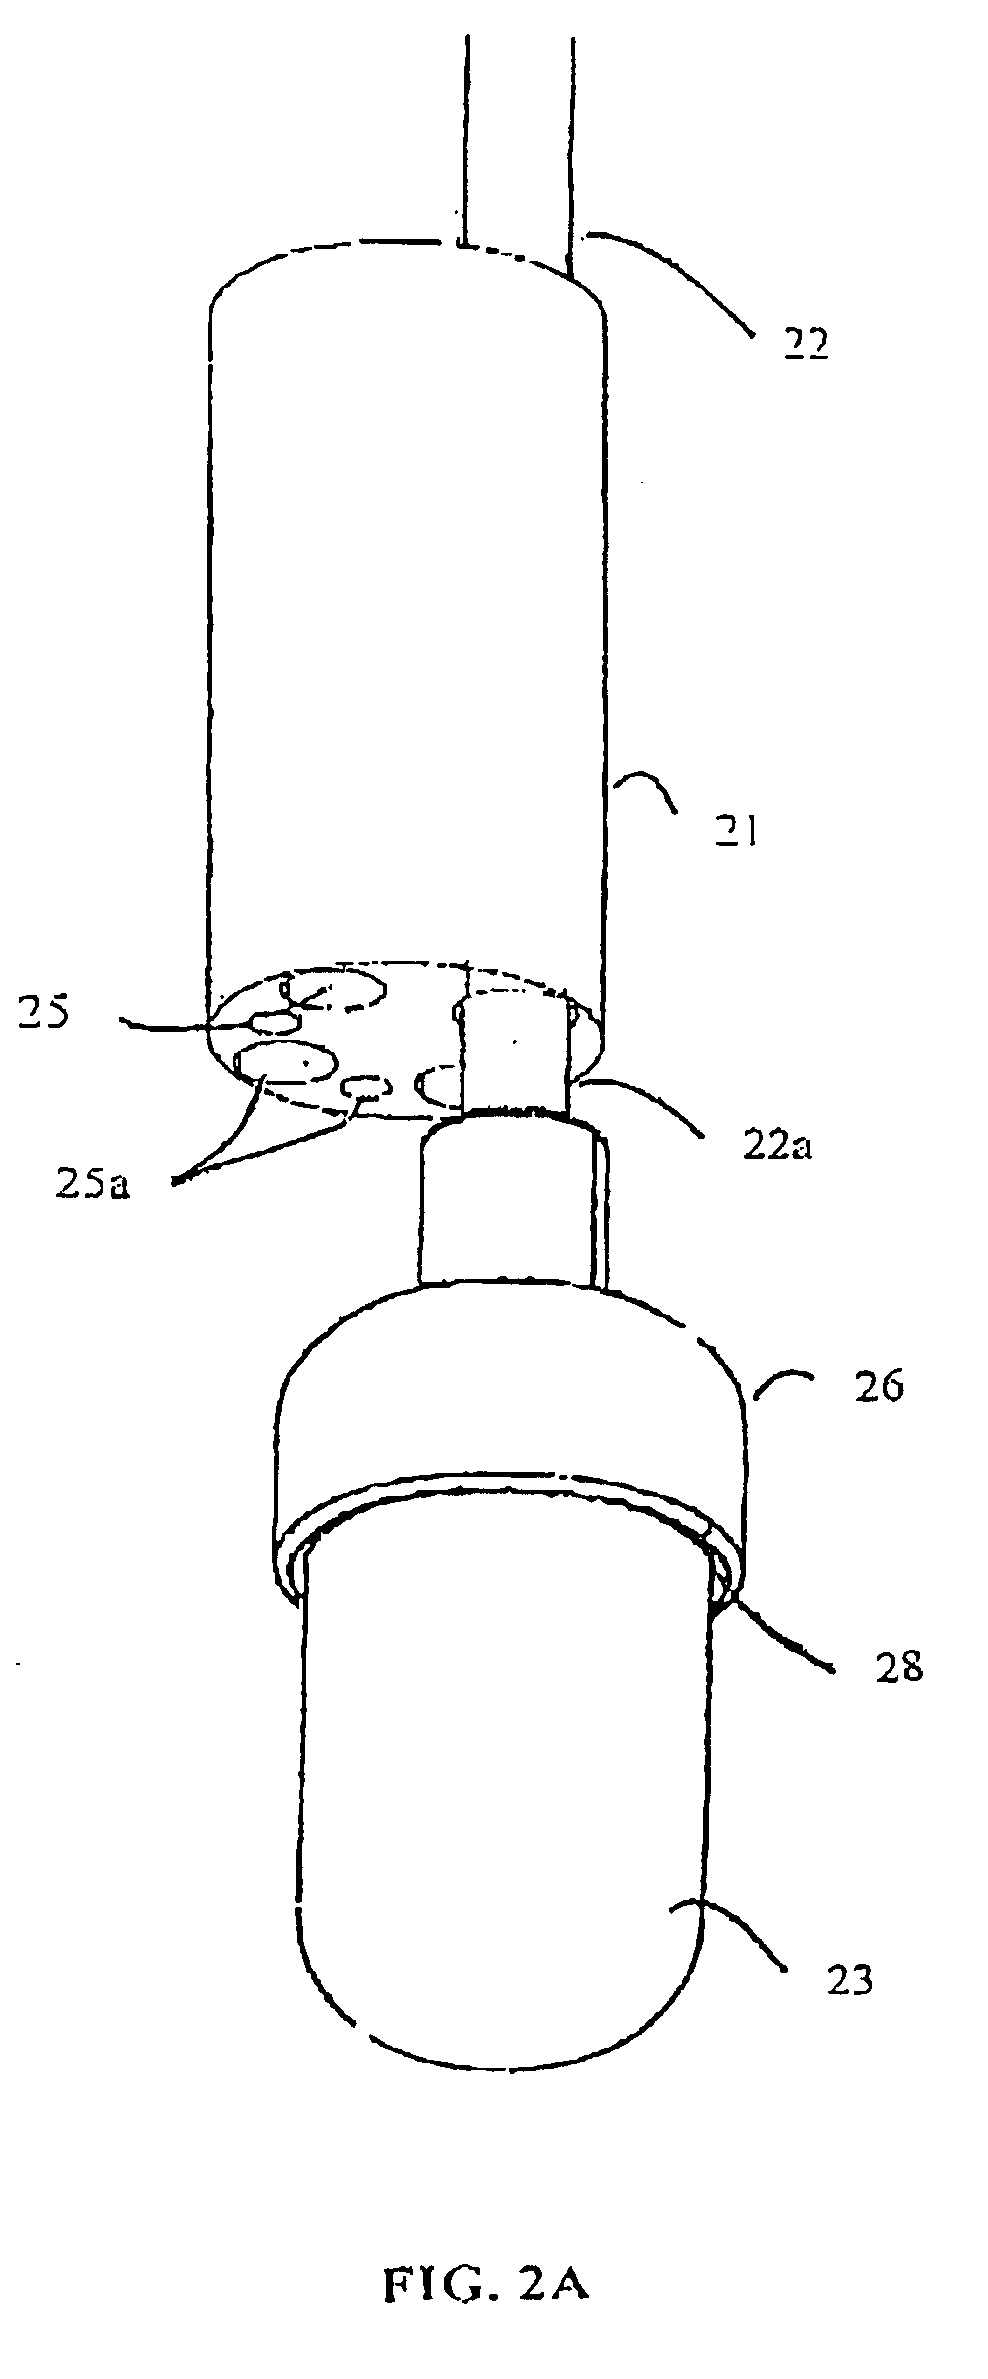 Device and method for positioning an object in a body lumen